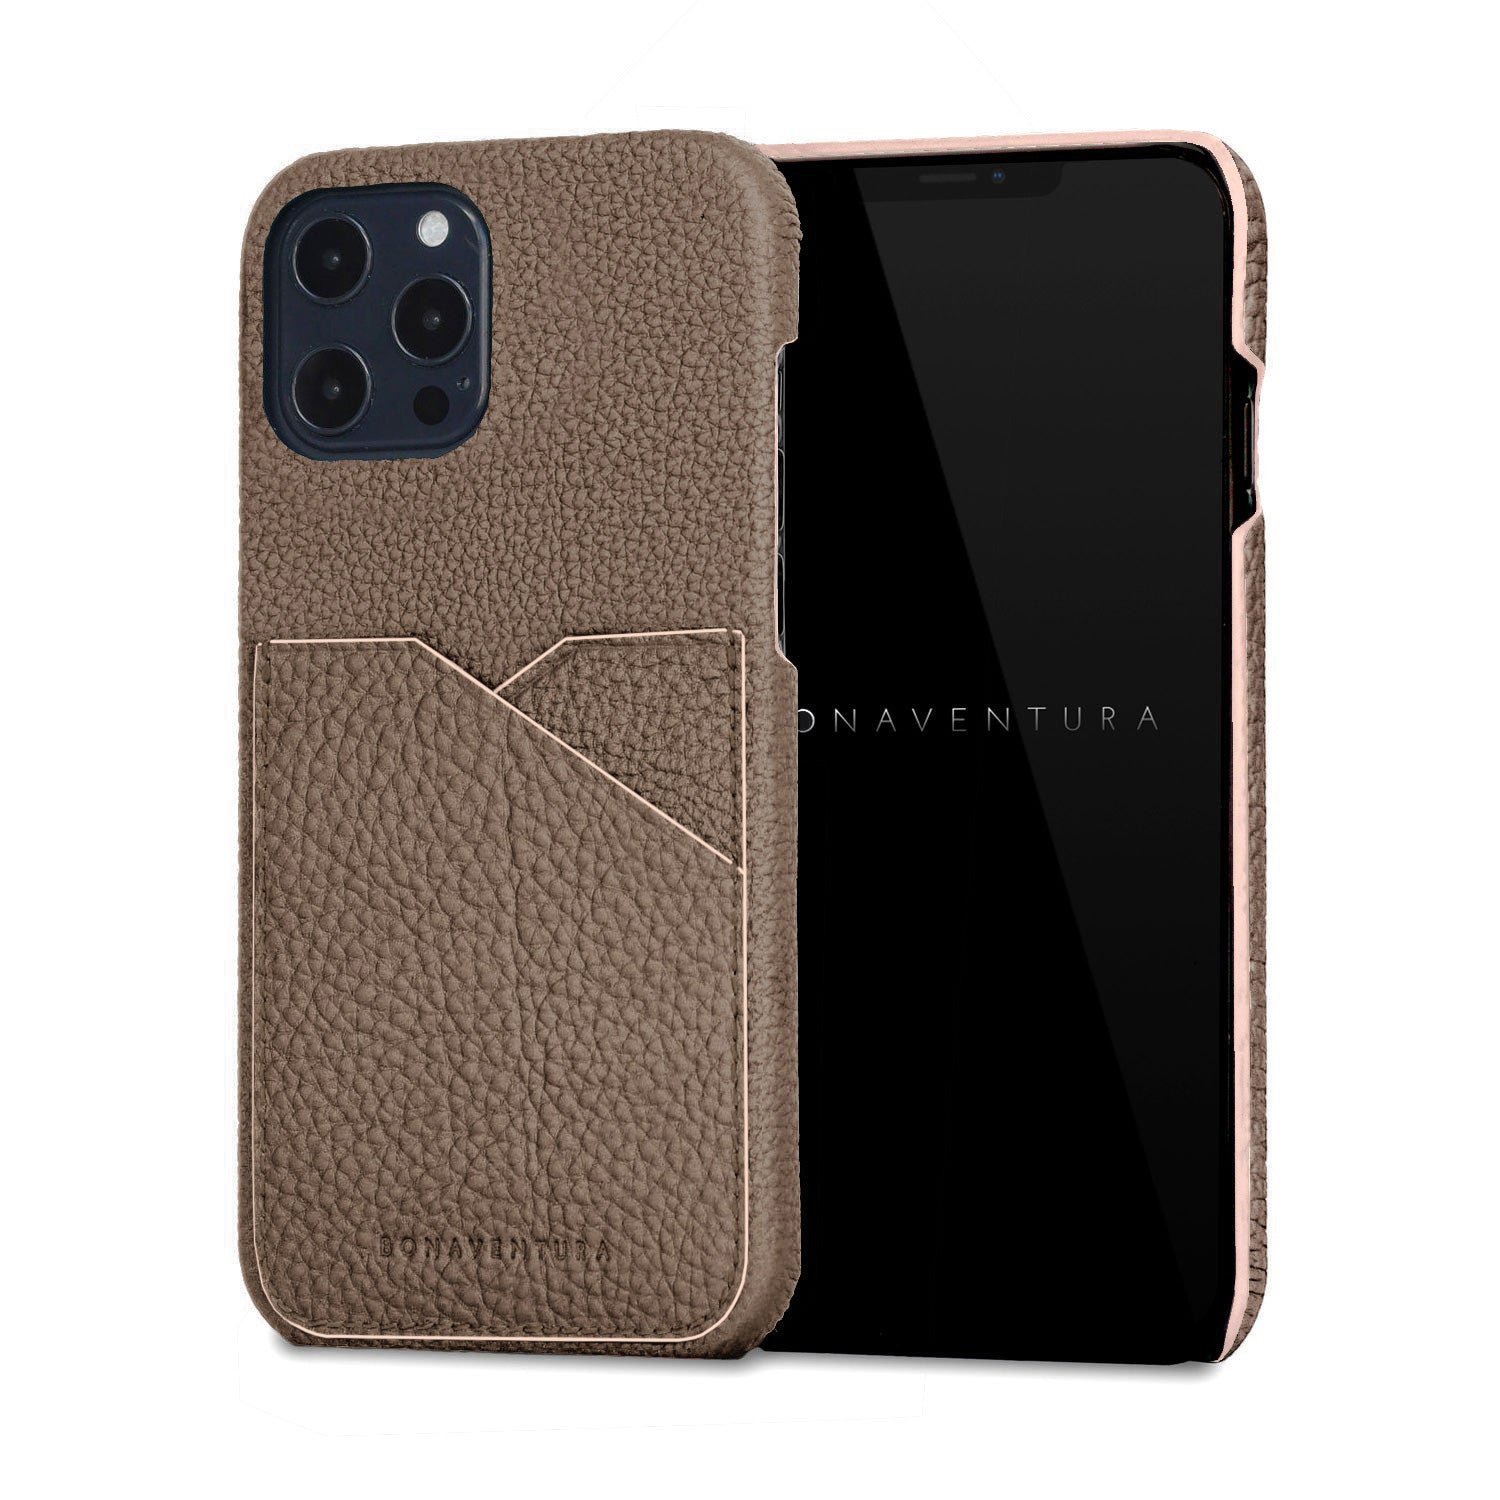 (iPhone 12 / 12 Pro) Back cover case Shrink leather